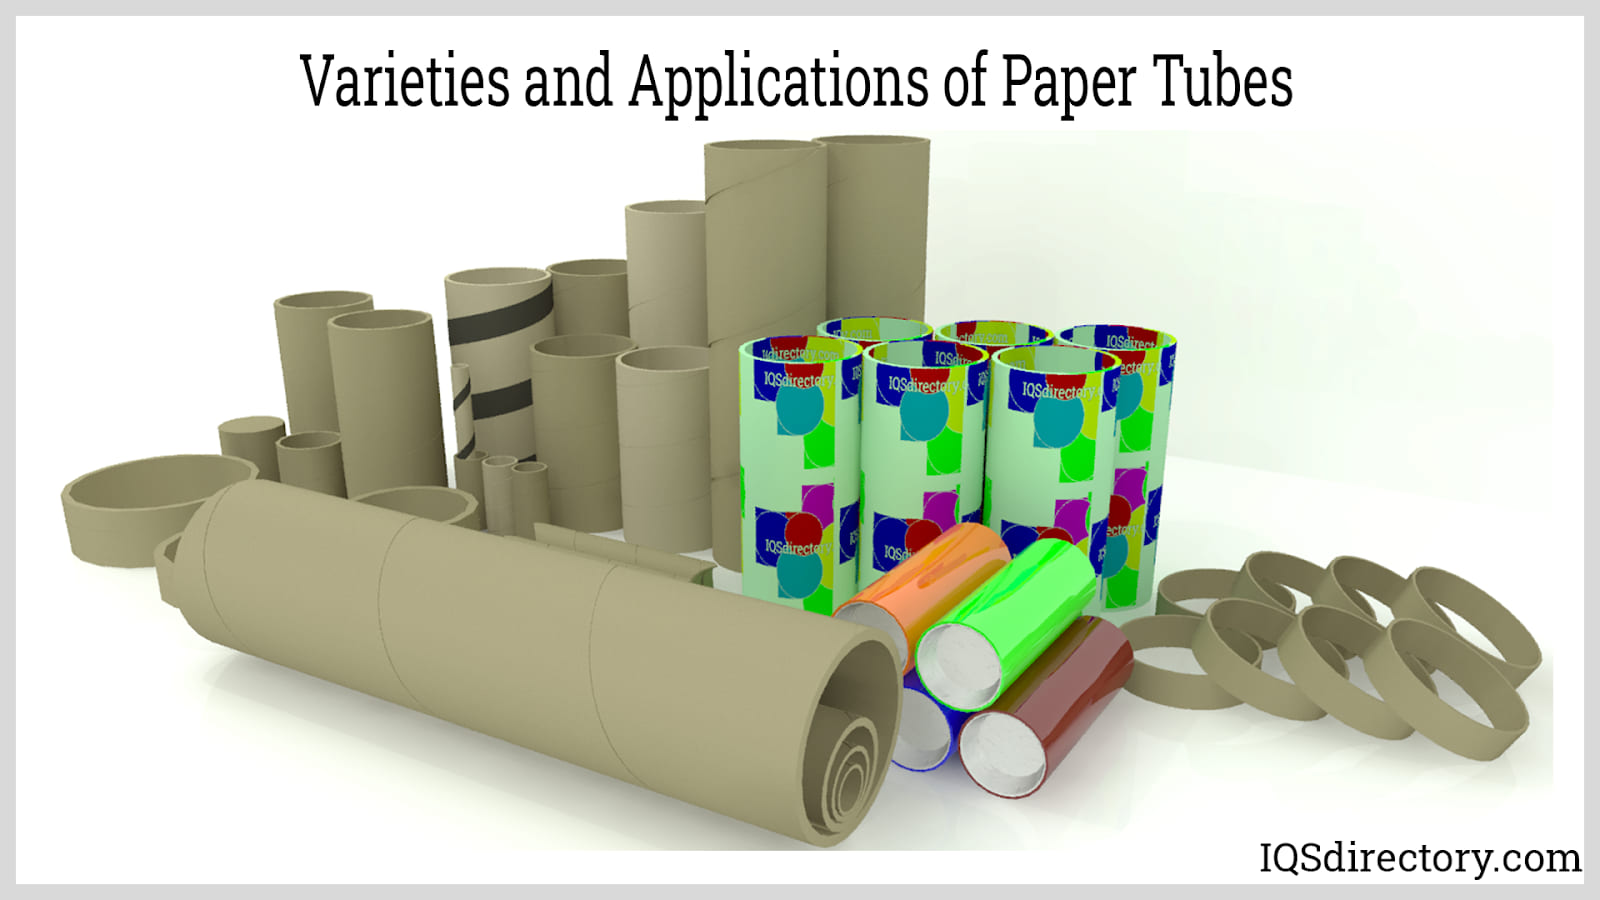 Varieties and Applications of Paper Tubes